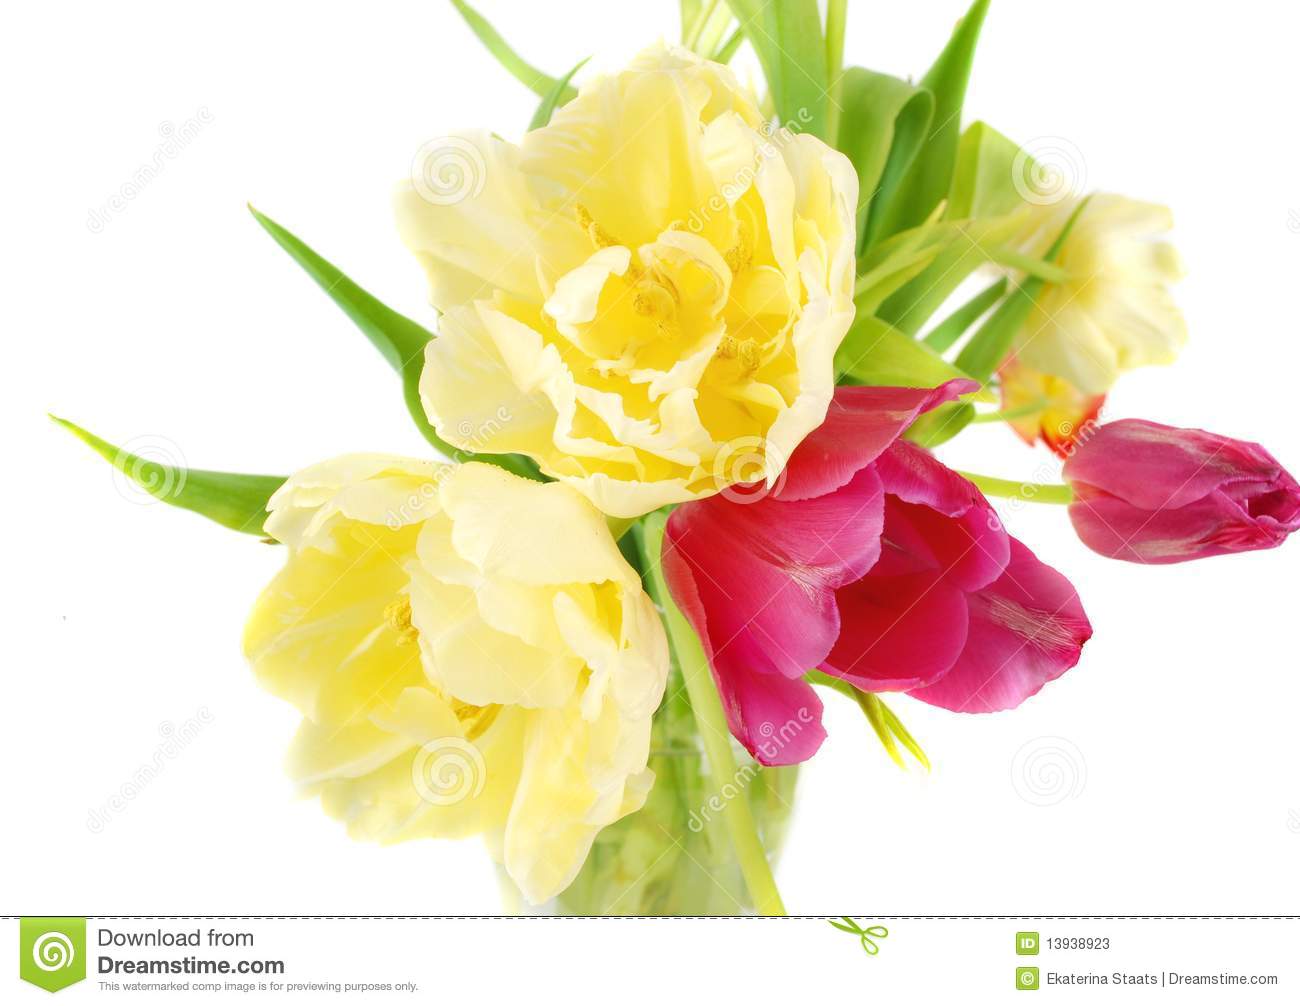 Tulips Bouquet In Glass Vase Stock Photos   Image  13938923